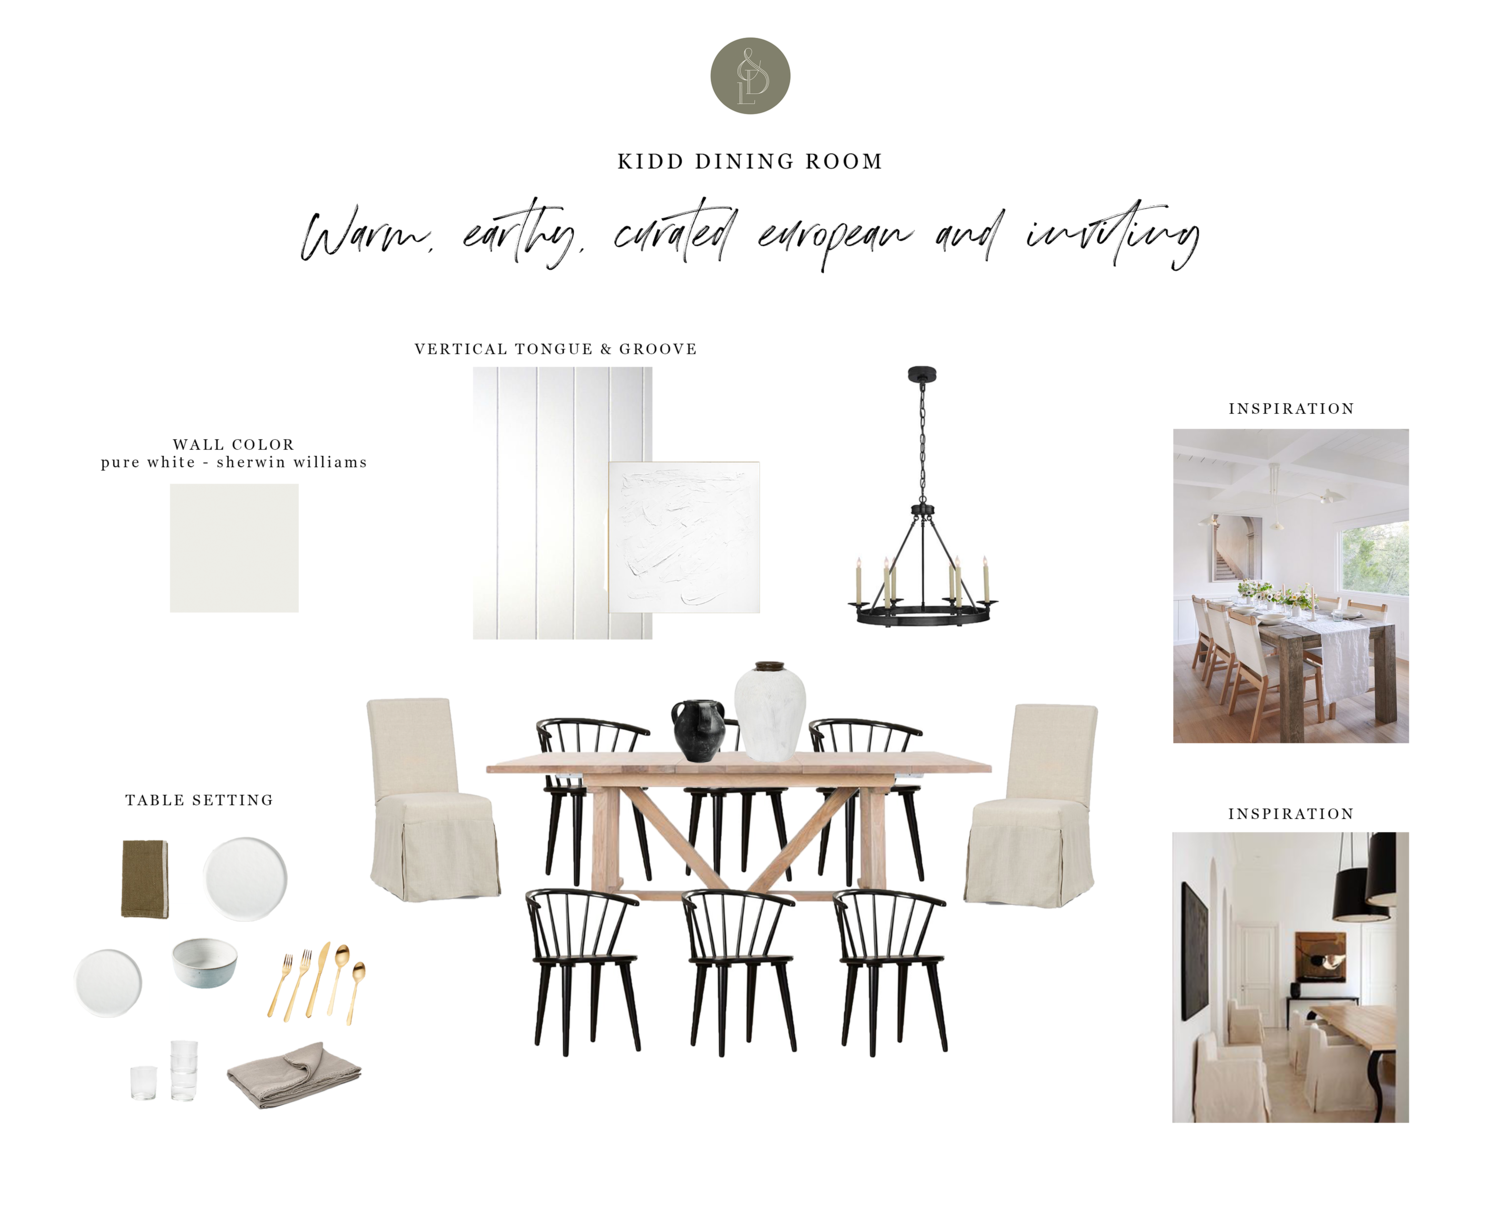 Kidd Dining Room Reveal (plus, sources!) — Light and Dwell